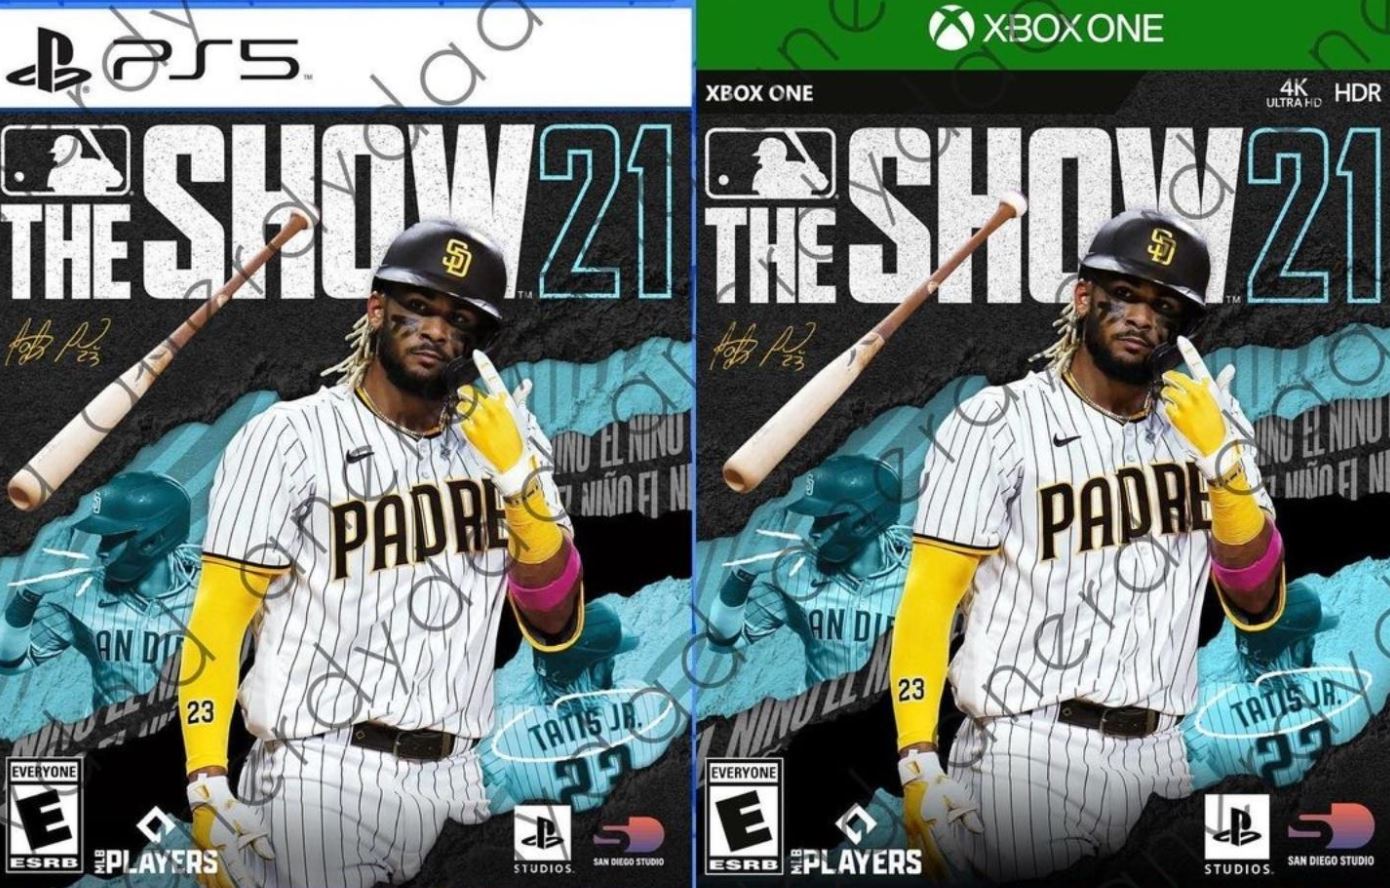 playstation-studios-san-diego-studio-logo-appears-on-xbox-retail-boxes-for-the-first-time-as-mlb-the-show-21-goes-multiplatform-2.jpg